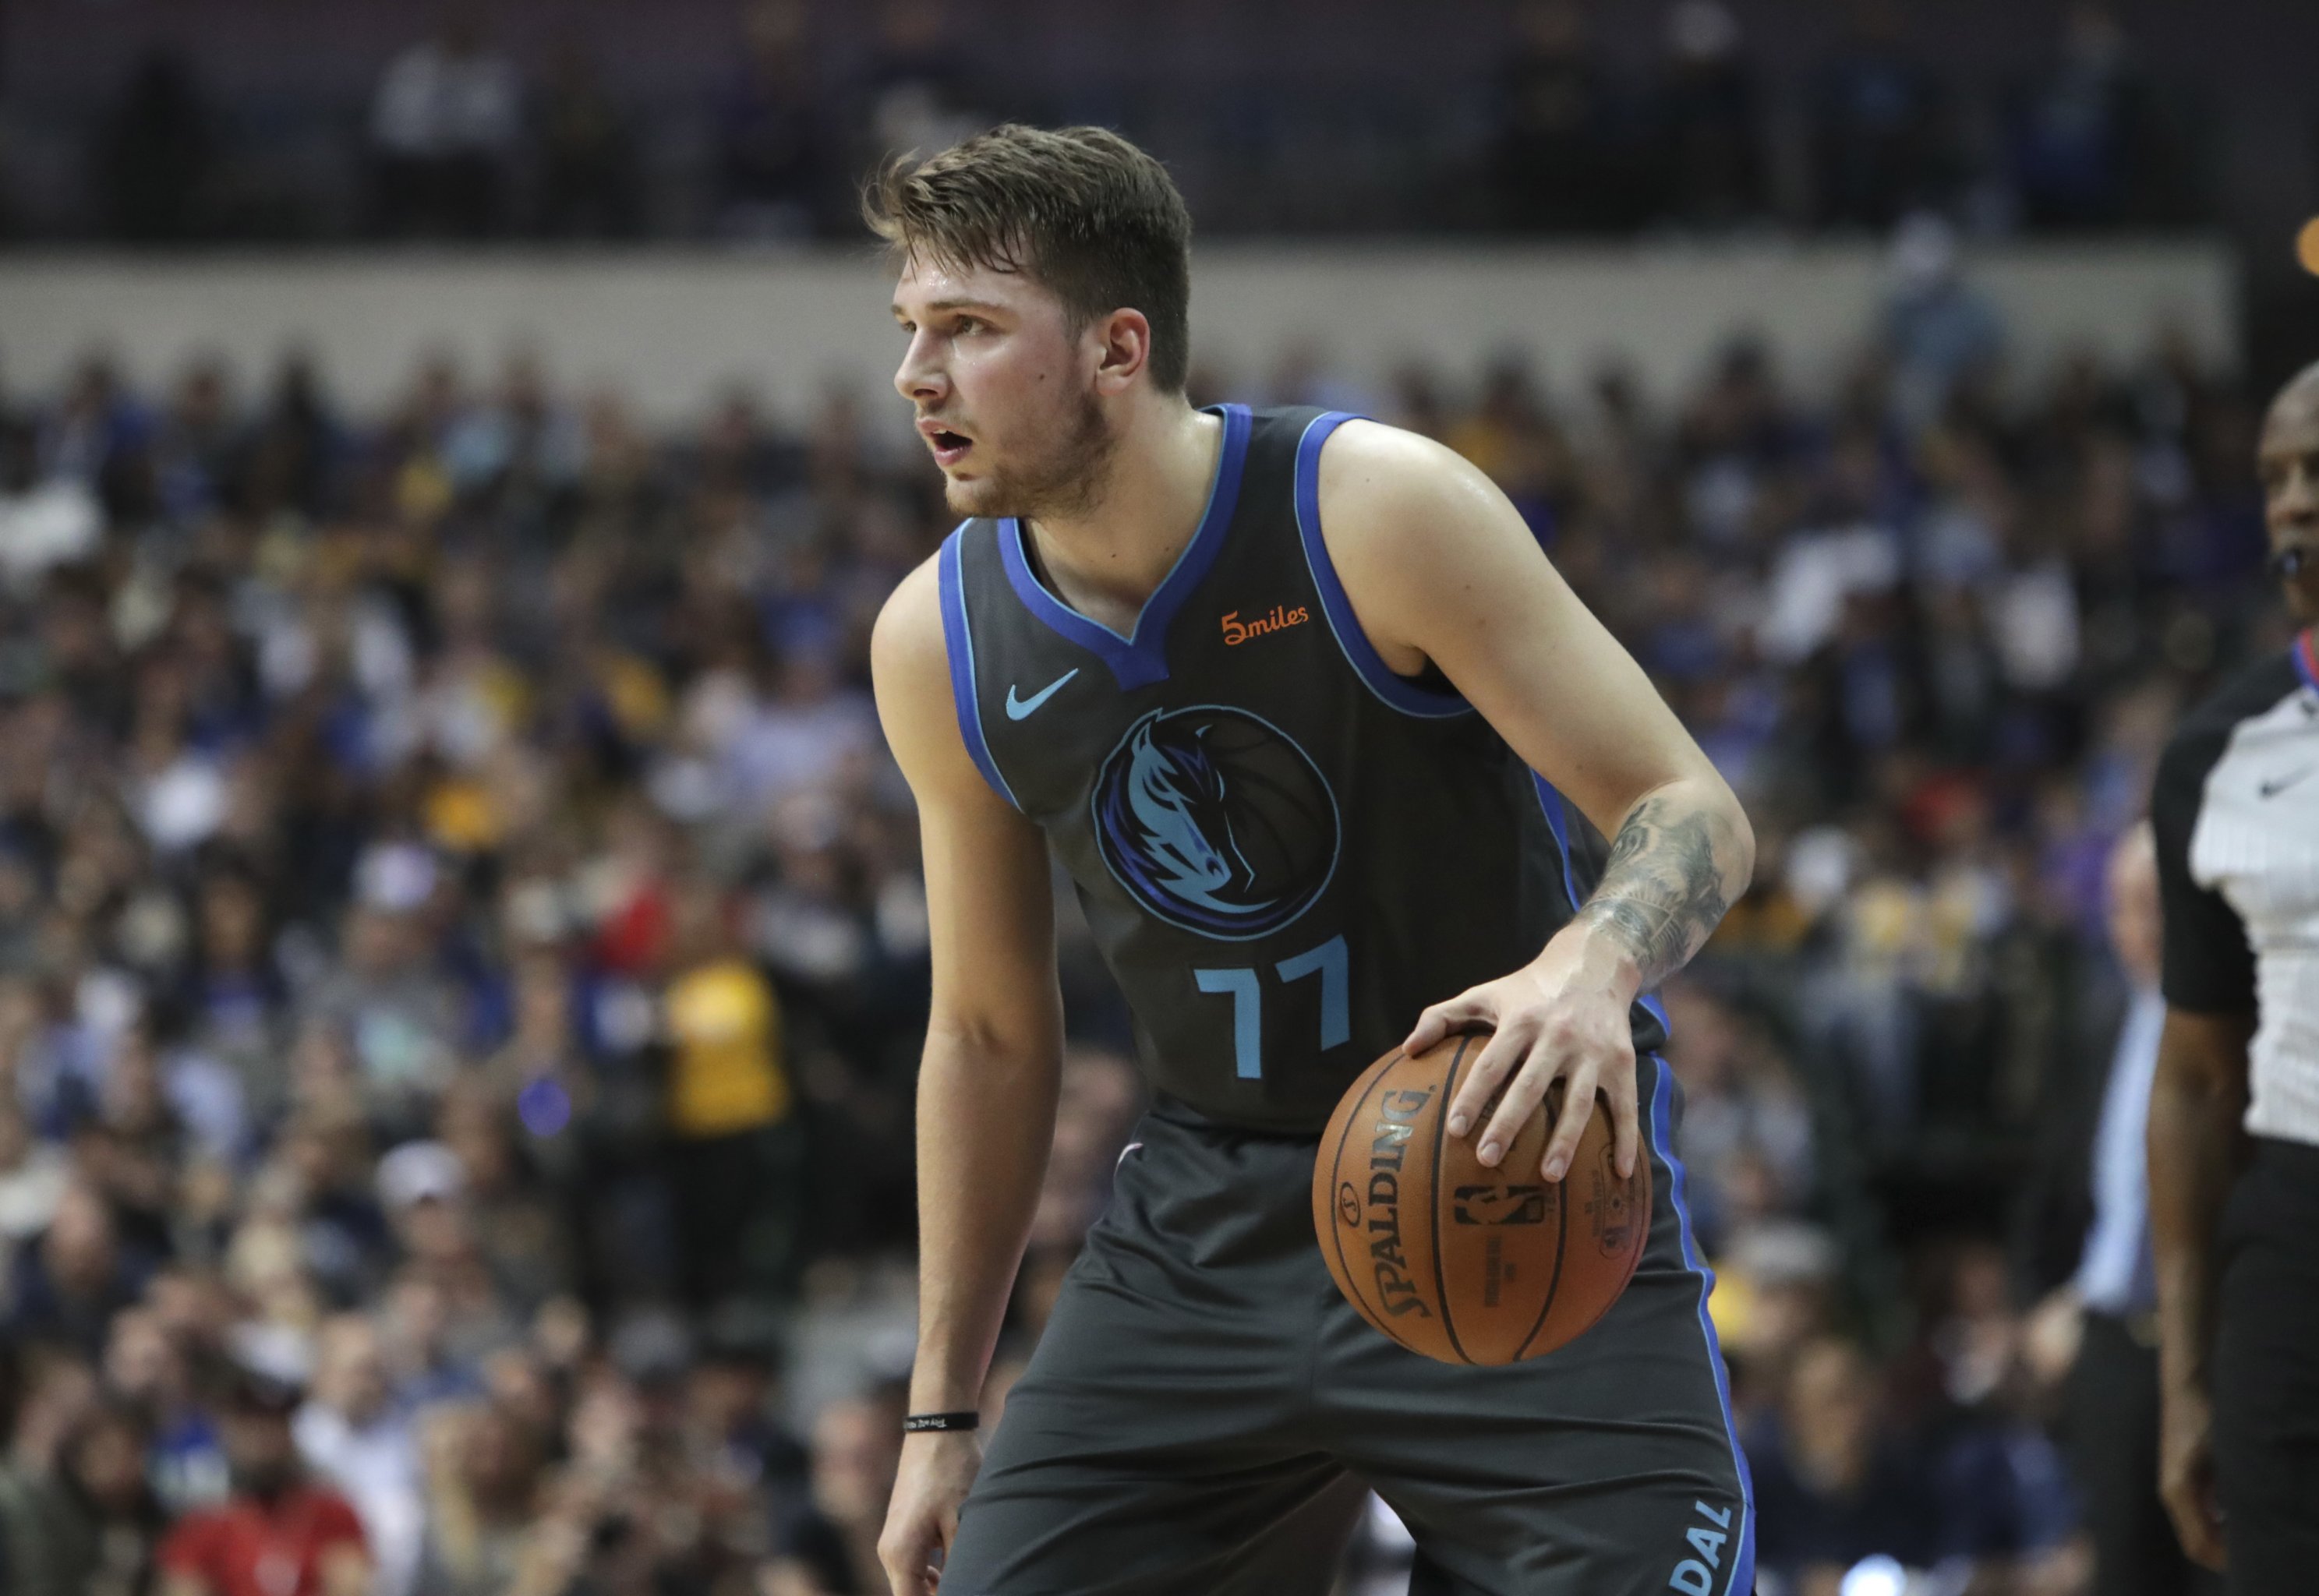 Why the NBA world is enthralled with Luka Doncic, the Mavericks'  19-year-old Slovenian rookie who is already dominating the NBA